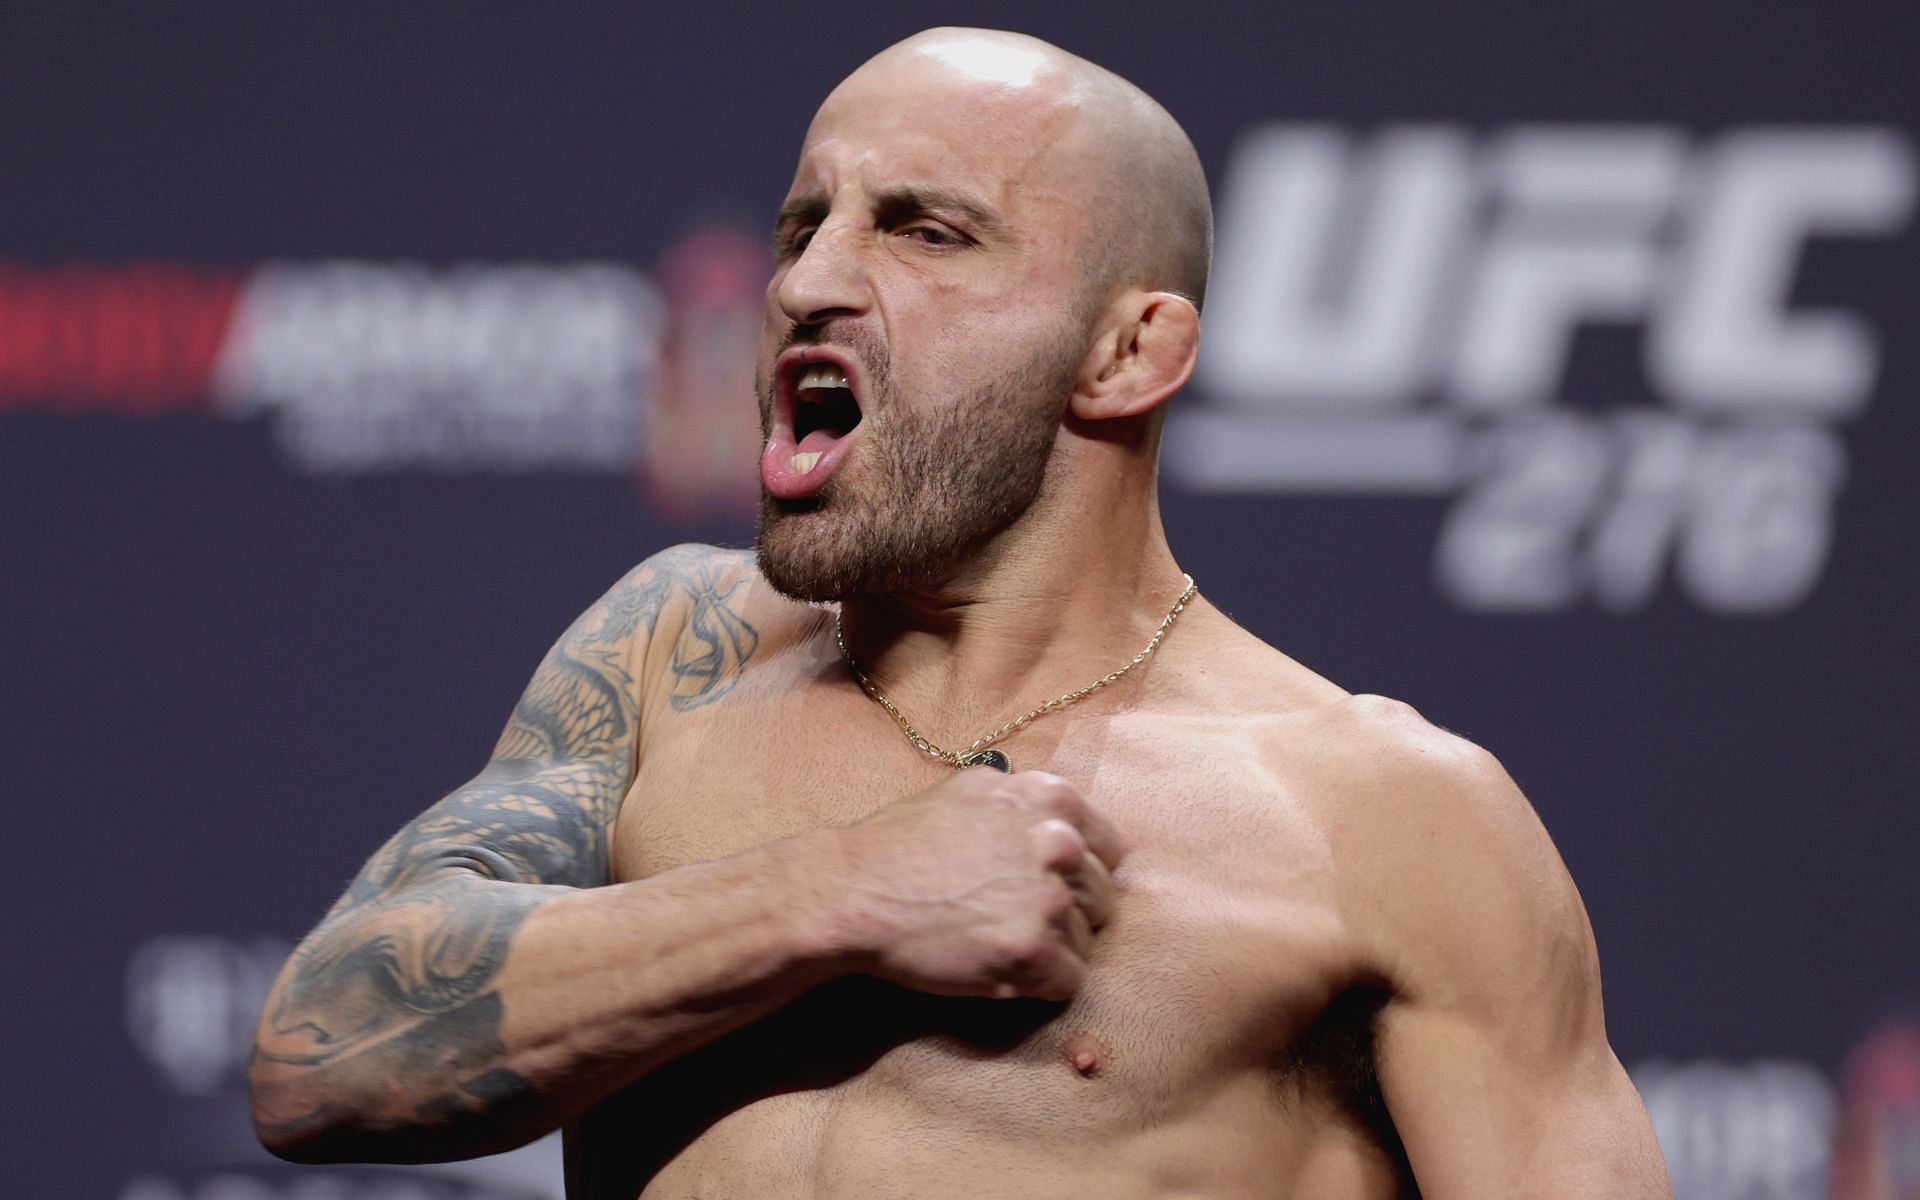 The No. 1-ranked UFC pound-for-pound fighter and reigning featherweight champion Alexander Volkanovski